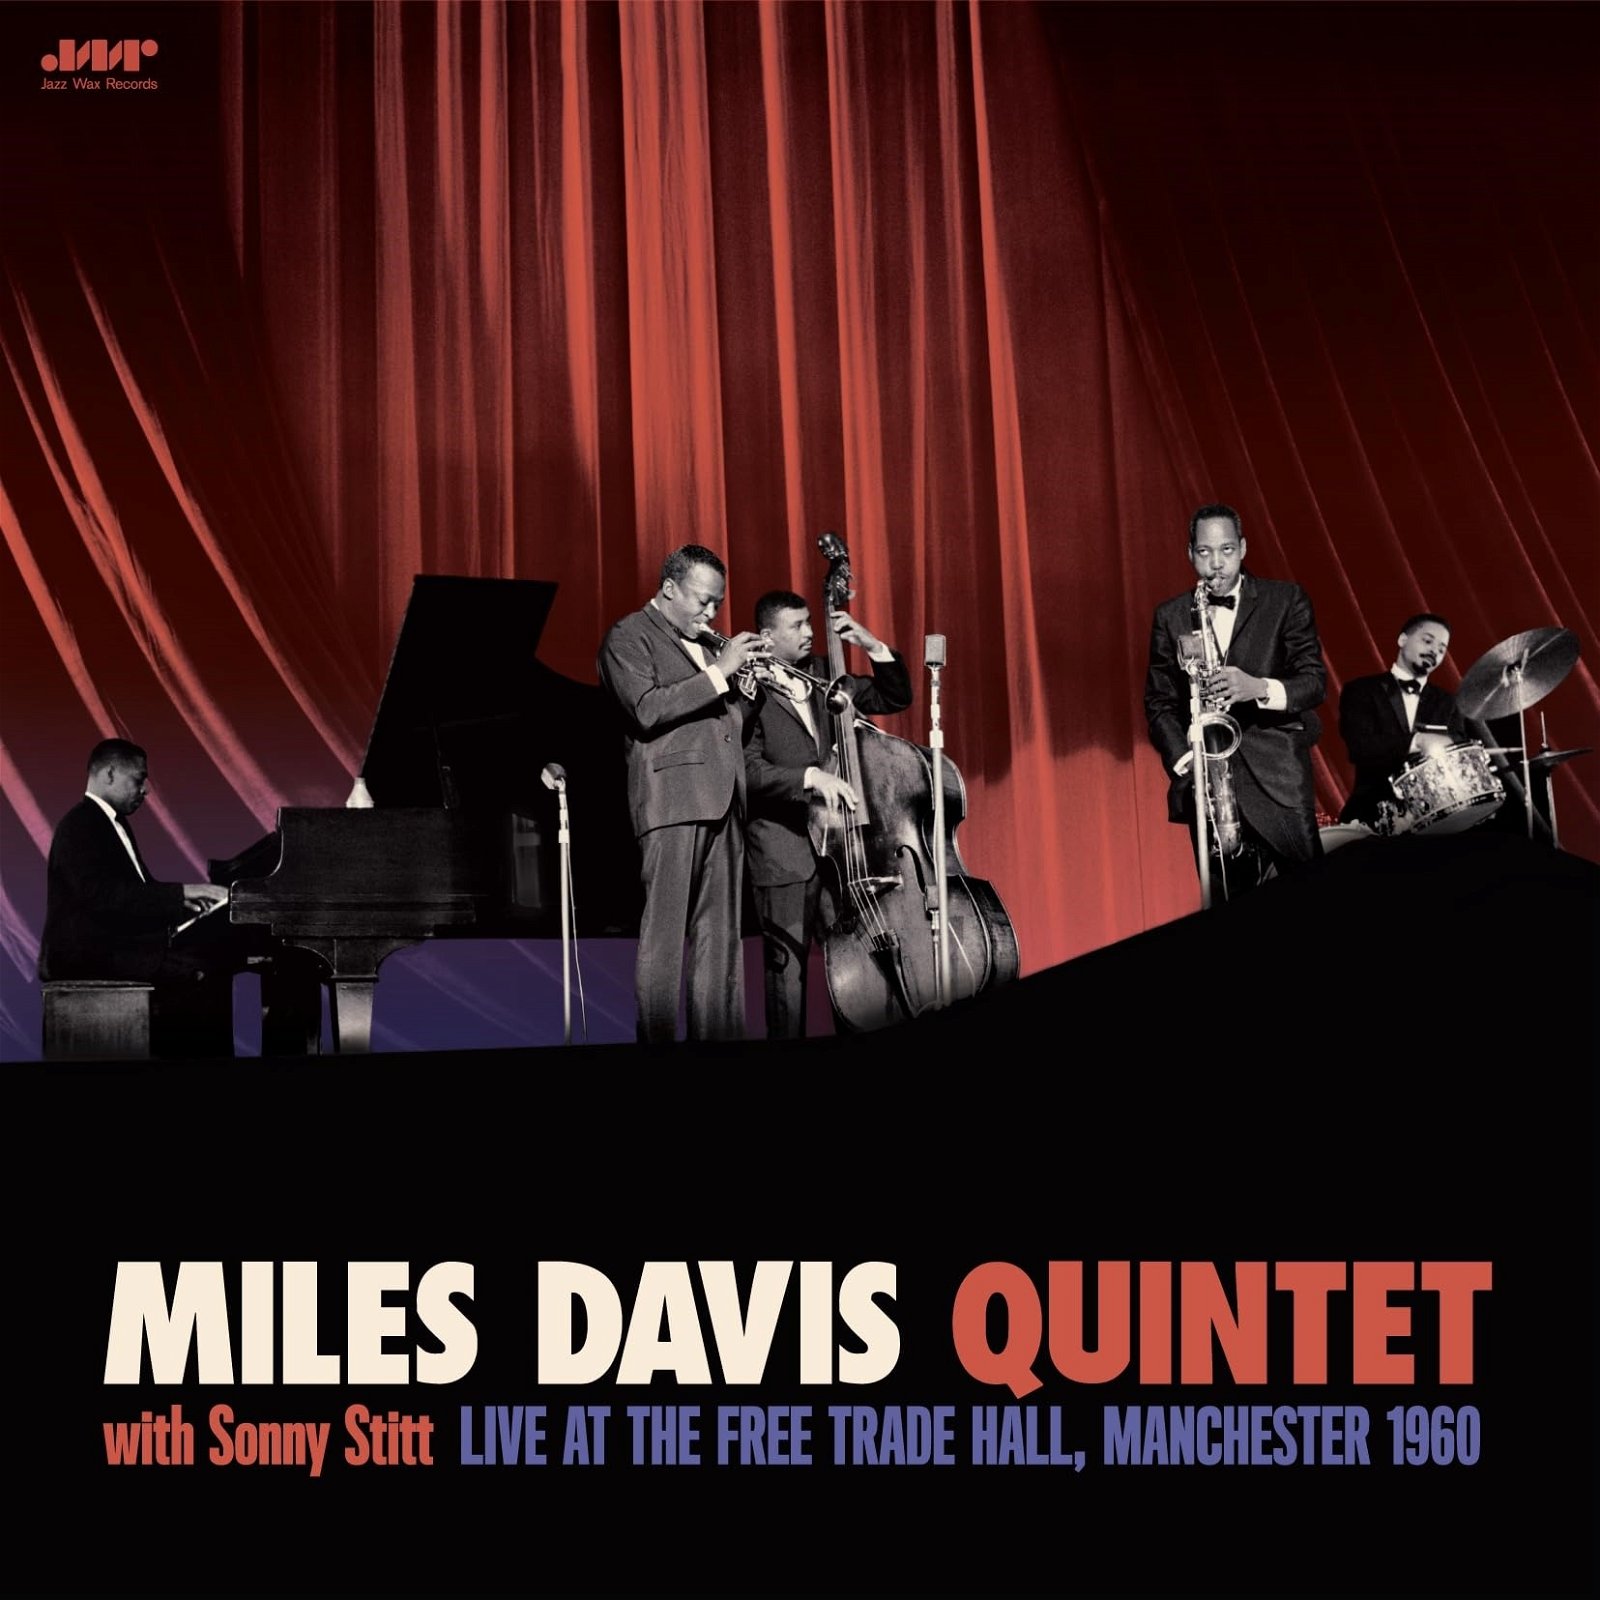 CD Shop - MILES DAVIS QUINTET WITH SONNY STITT: LIVE AT THE FREE TRADE HALL, MANCHESTER 1960